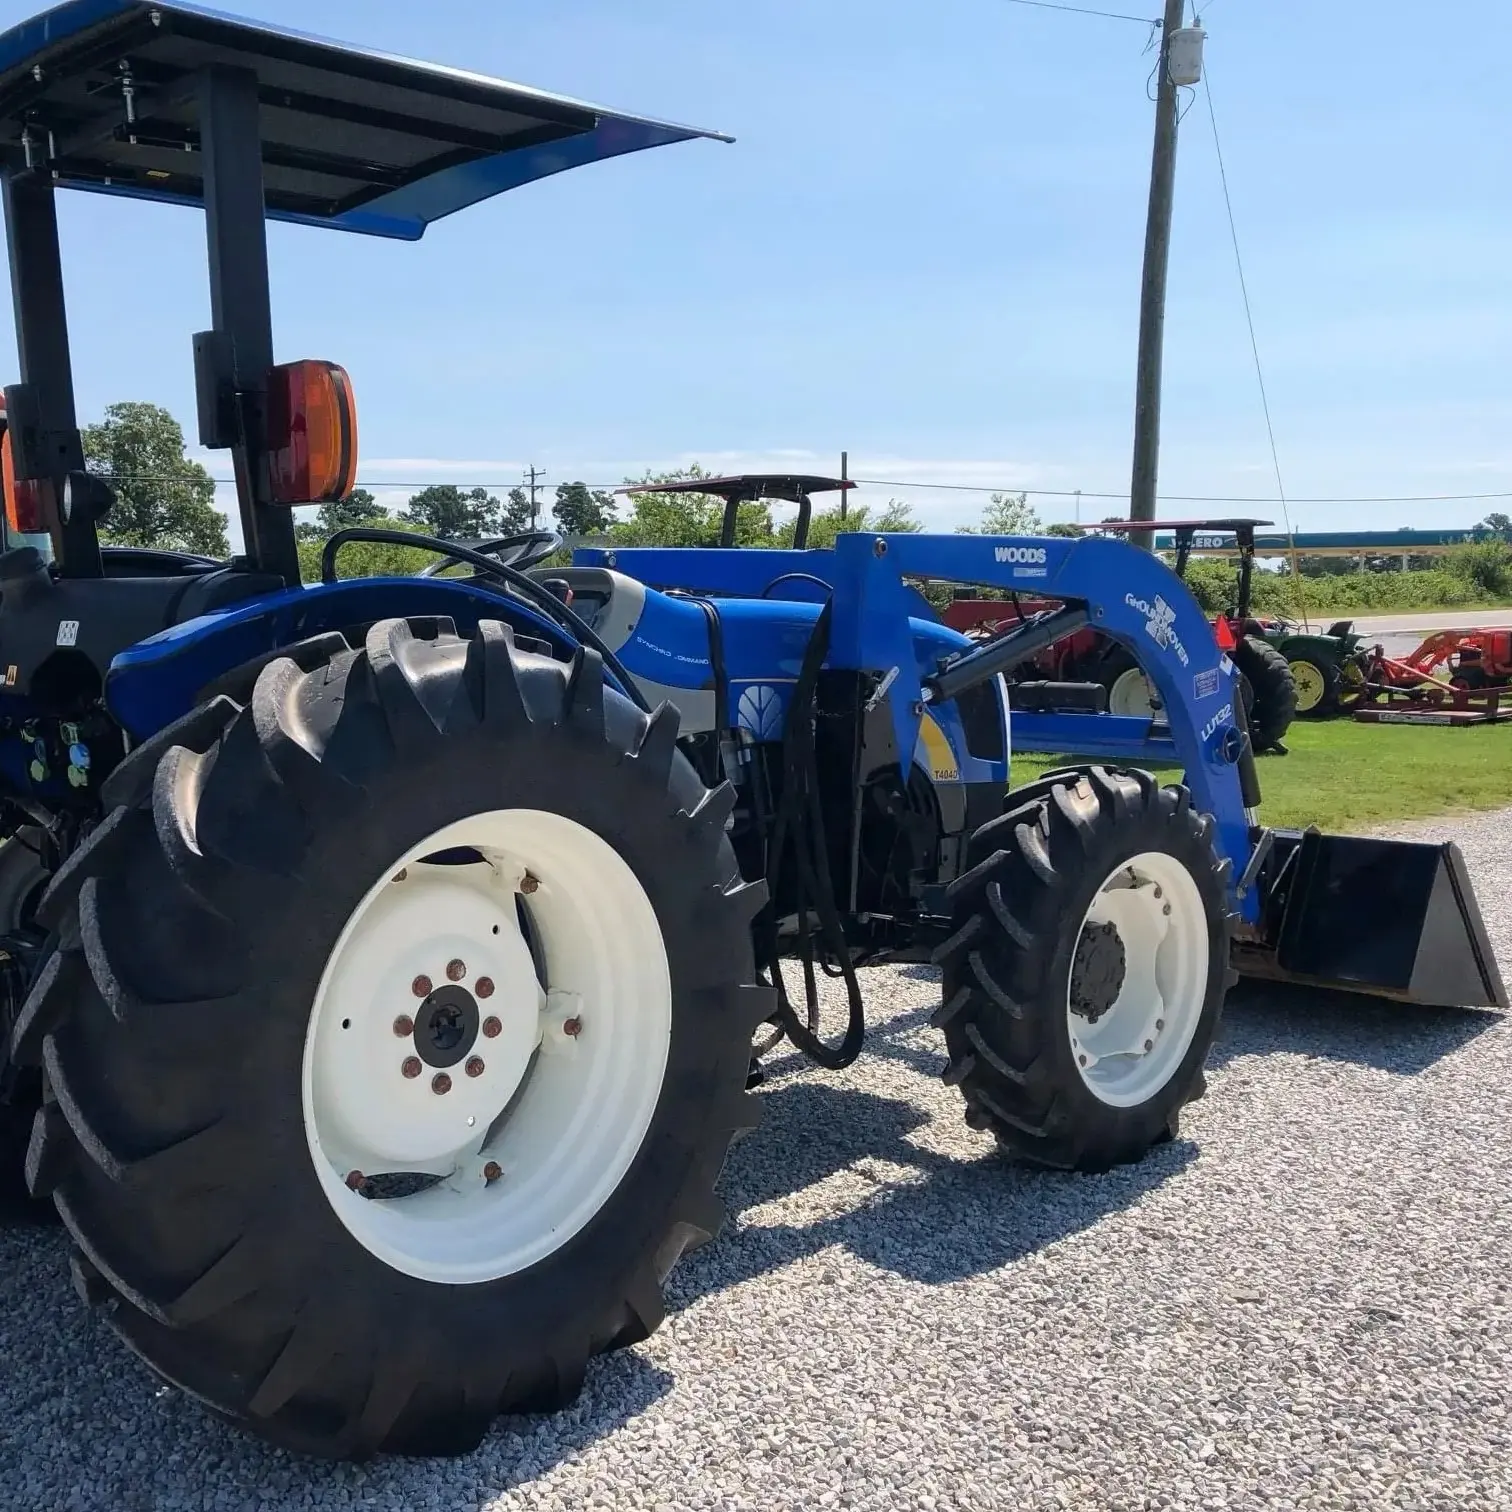 BUY Used Good And Quality New-Holland Agricultural Farm Tractor Used/second hand/new tractor 4X4wd New Holland with loader